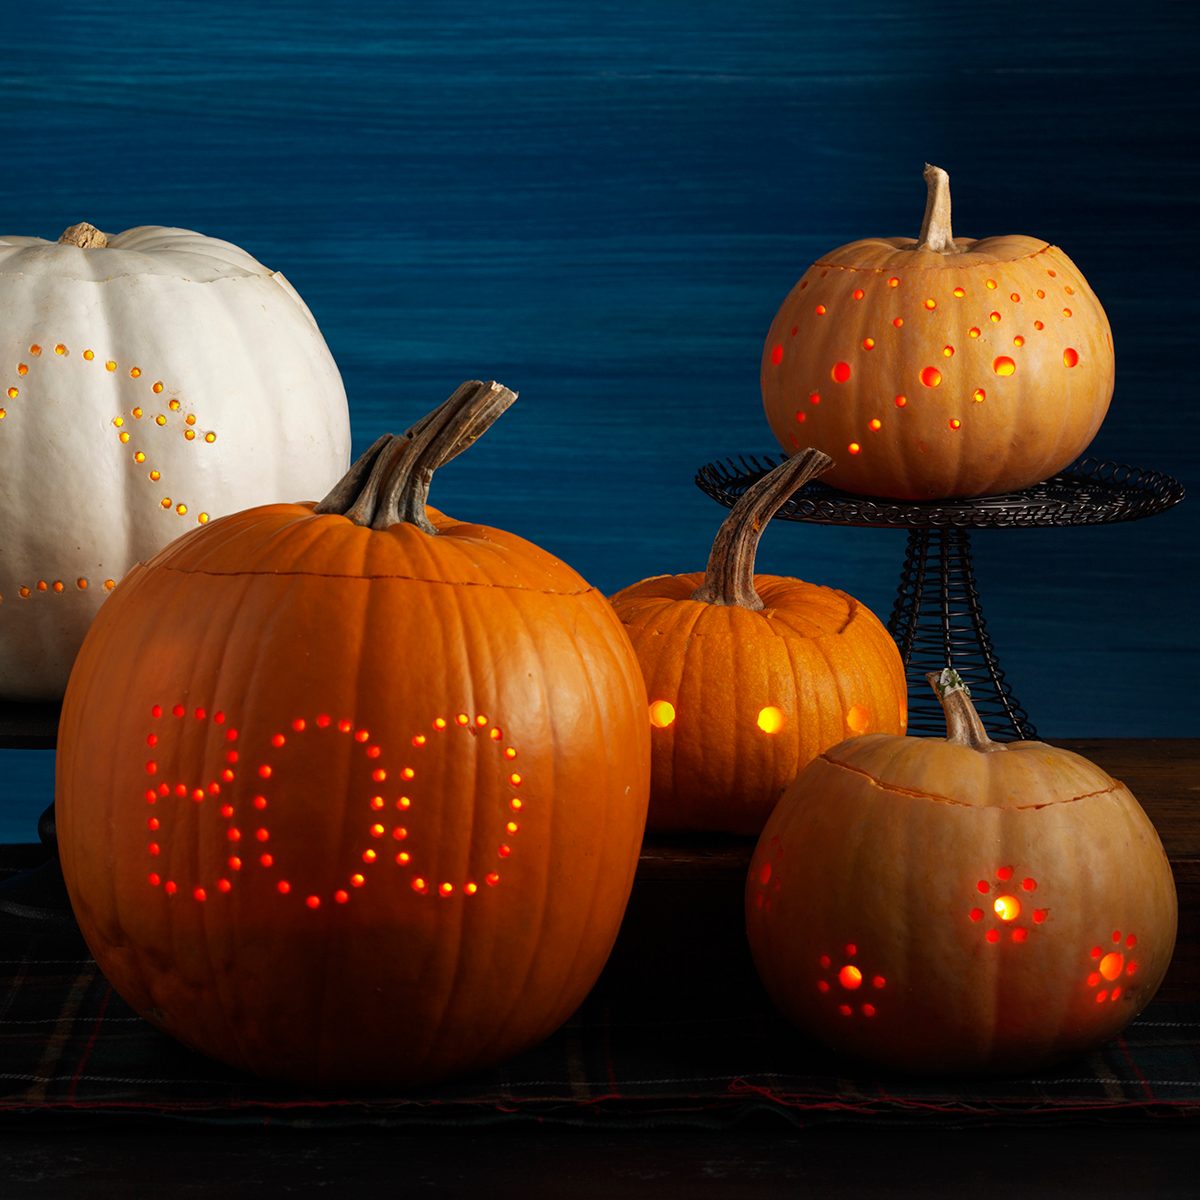 Five illuminated jack-o-laterns that are carved with mini holes that form different patterns and designs